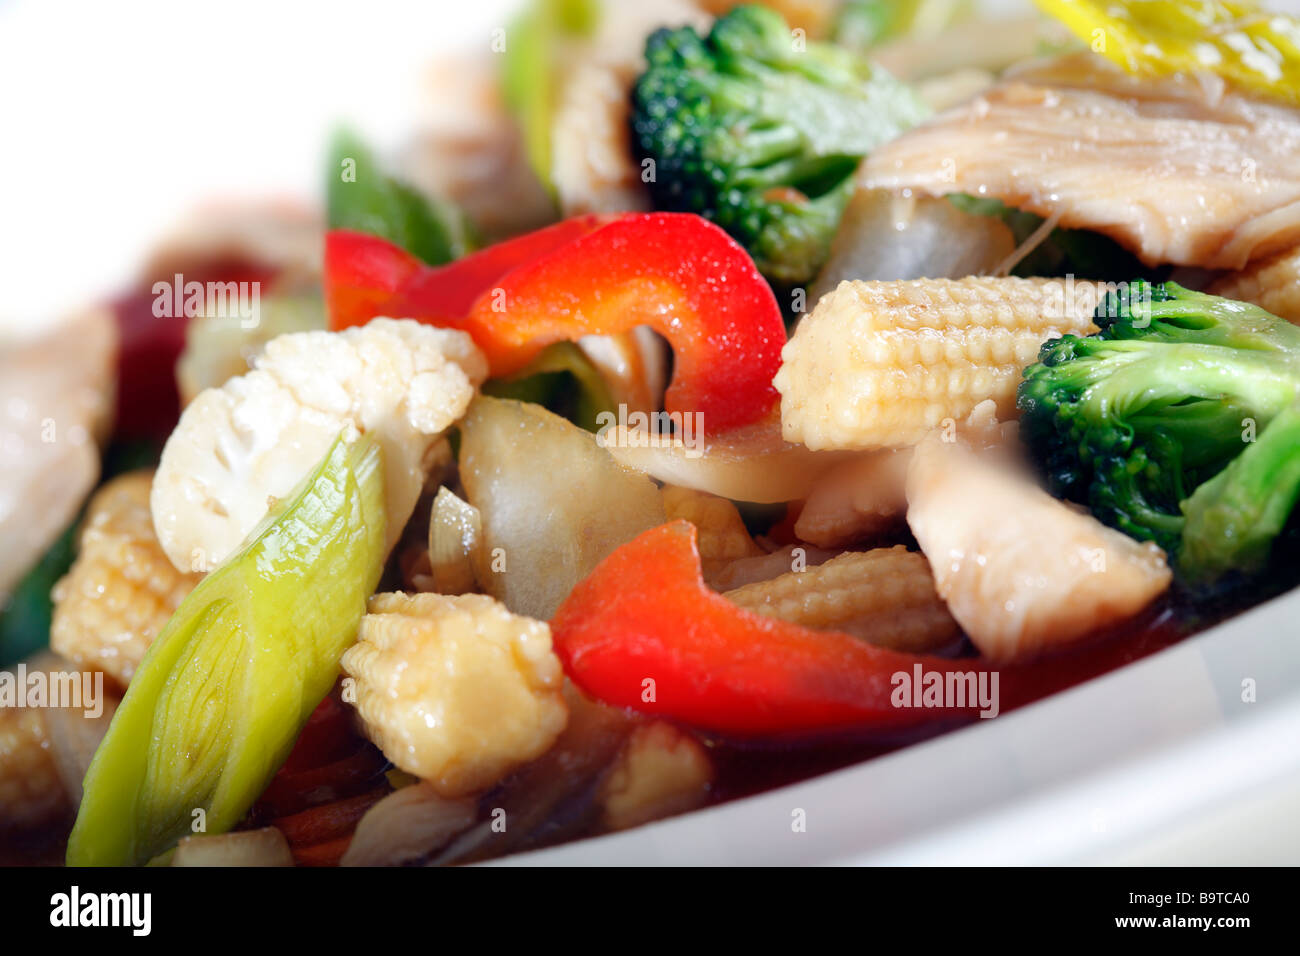 Chicken and vegetables Stock Photo